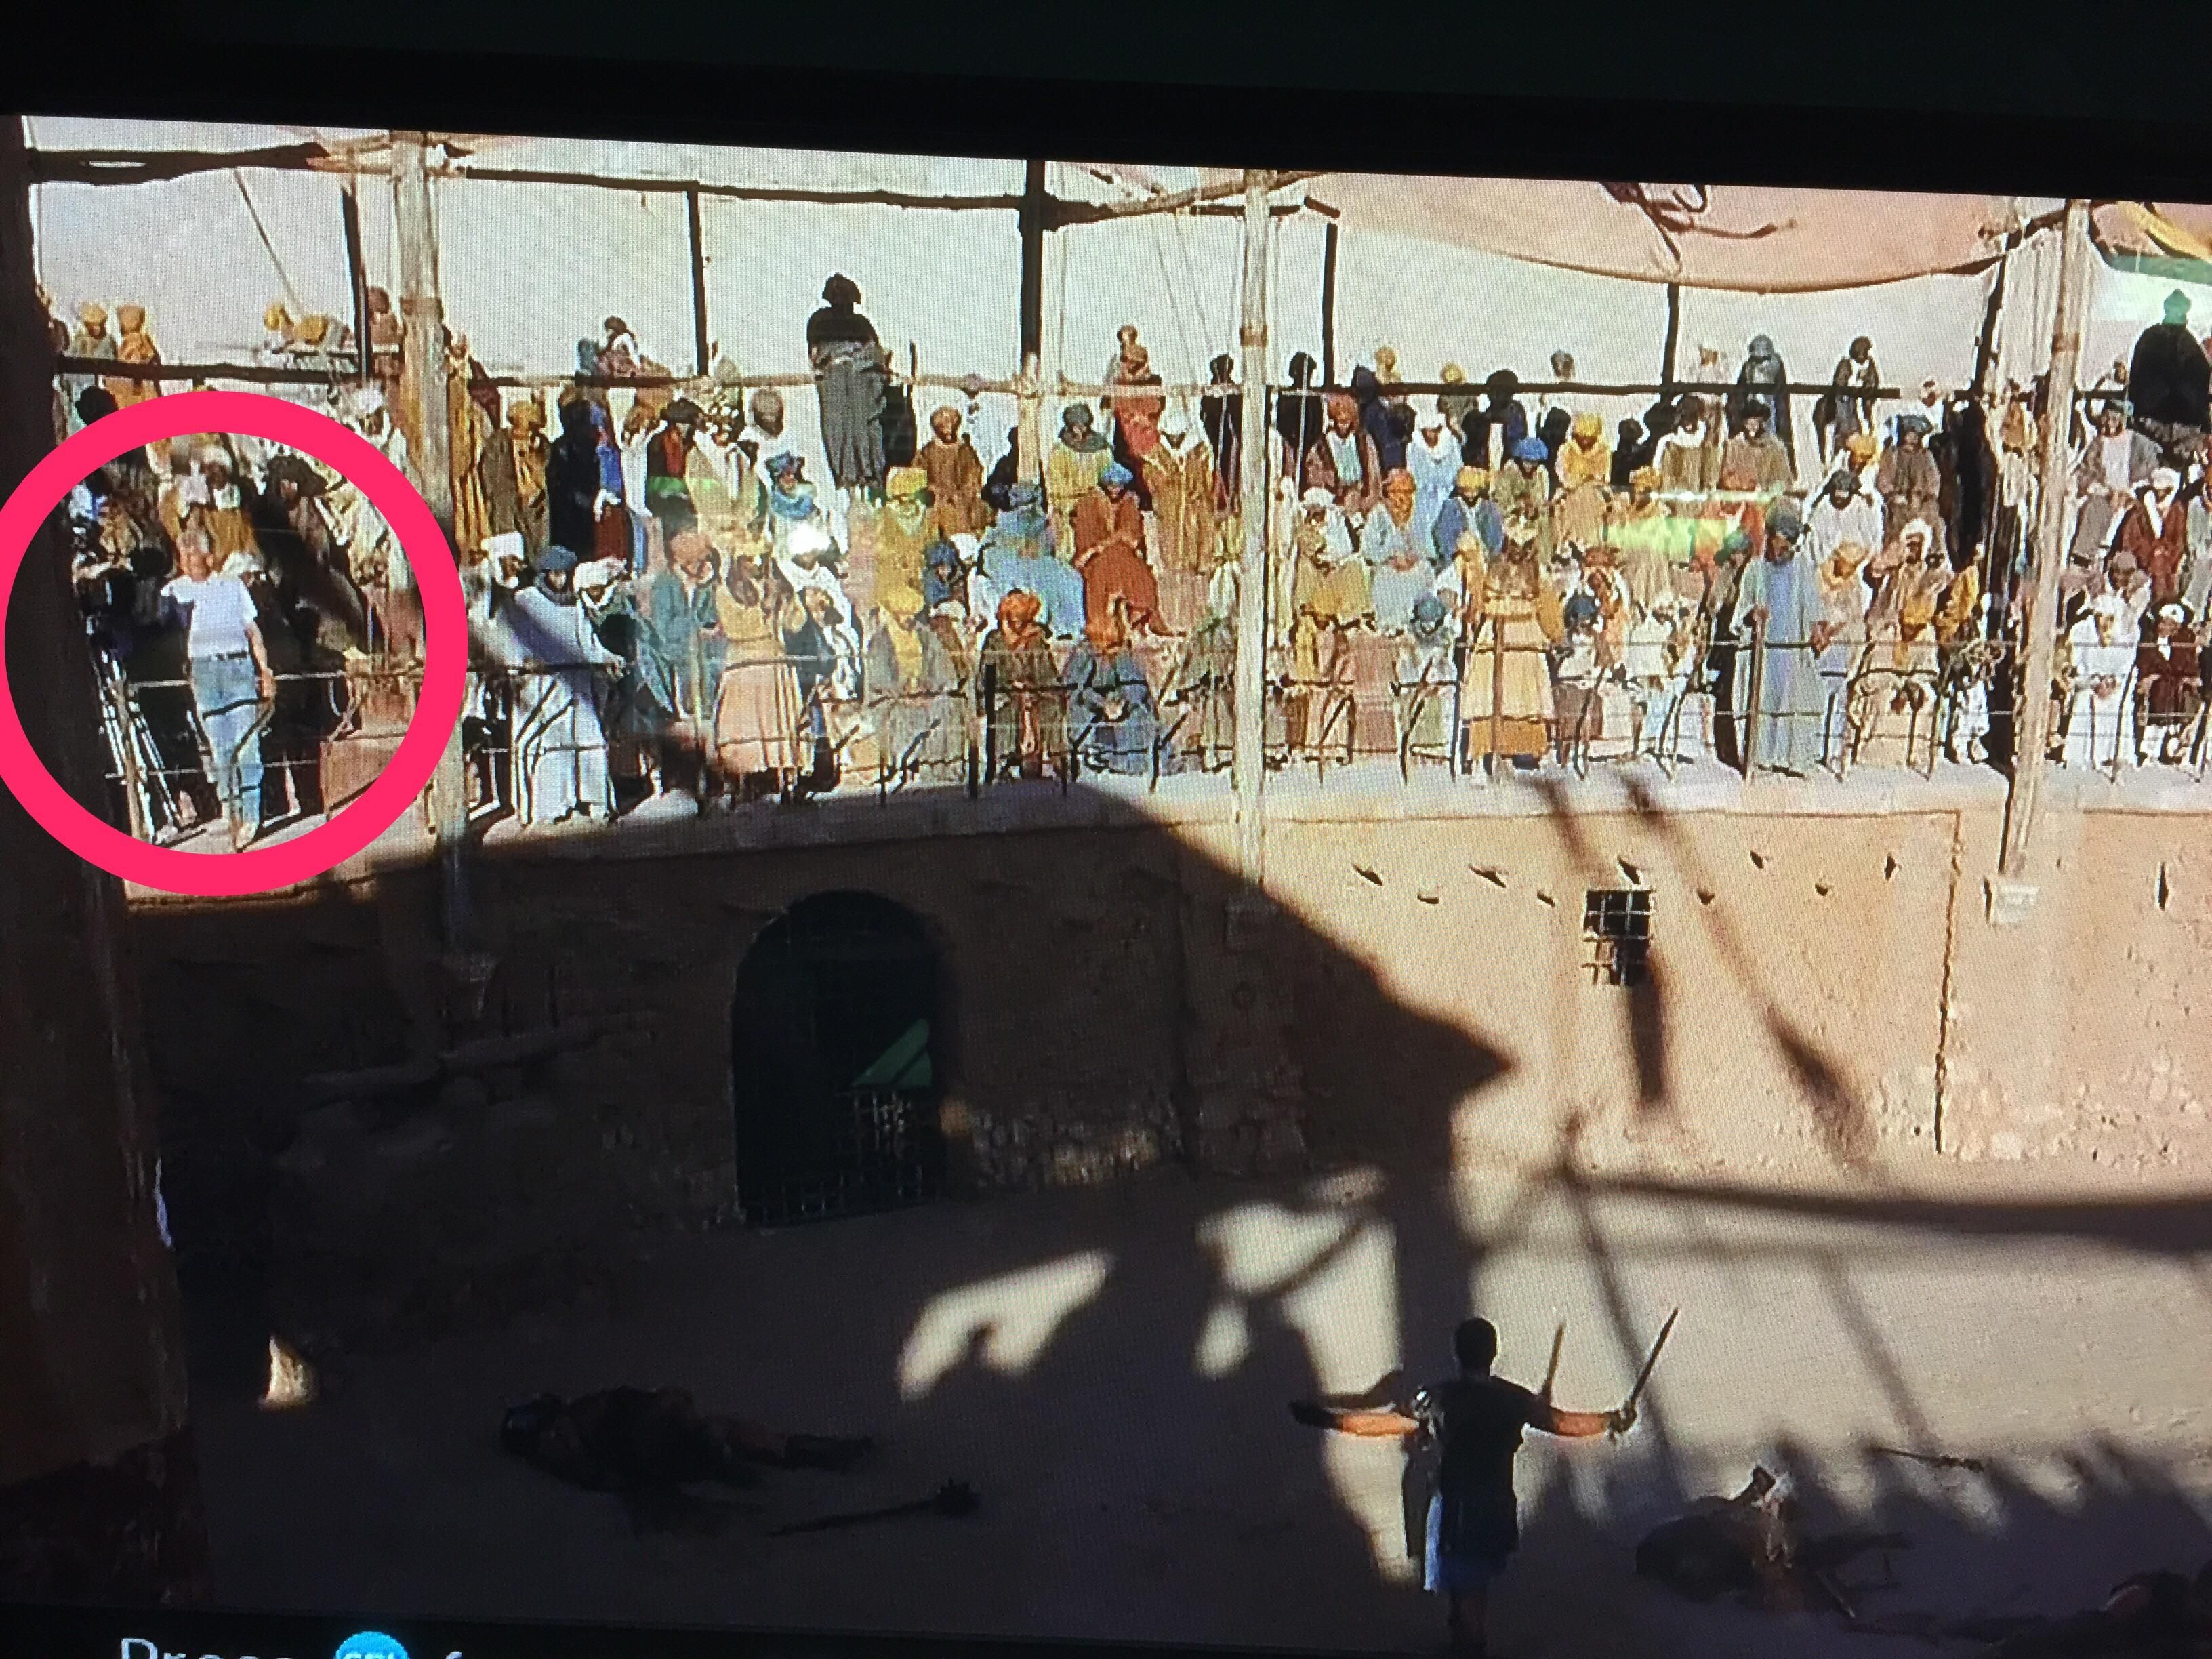 My son spotted the camera, tripod and assistant in the movie Gladiator, when he was yelling, "Are you not entertained?"